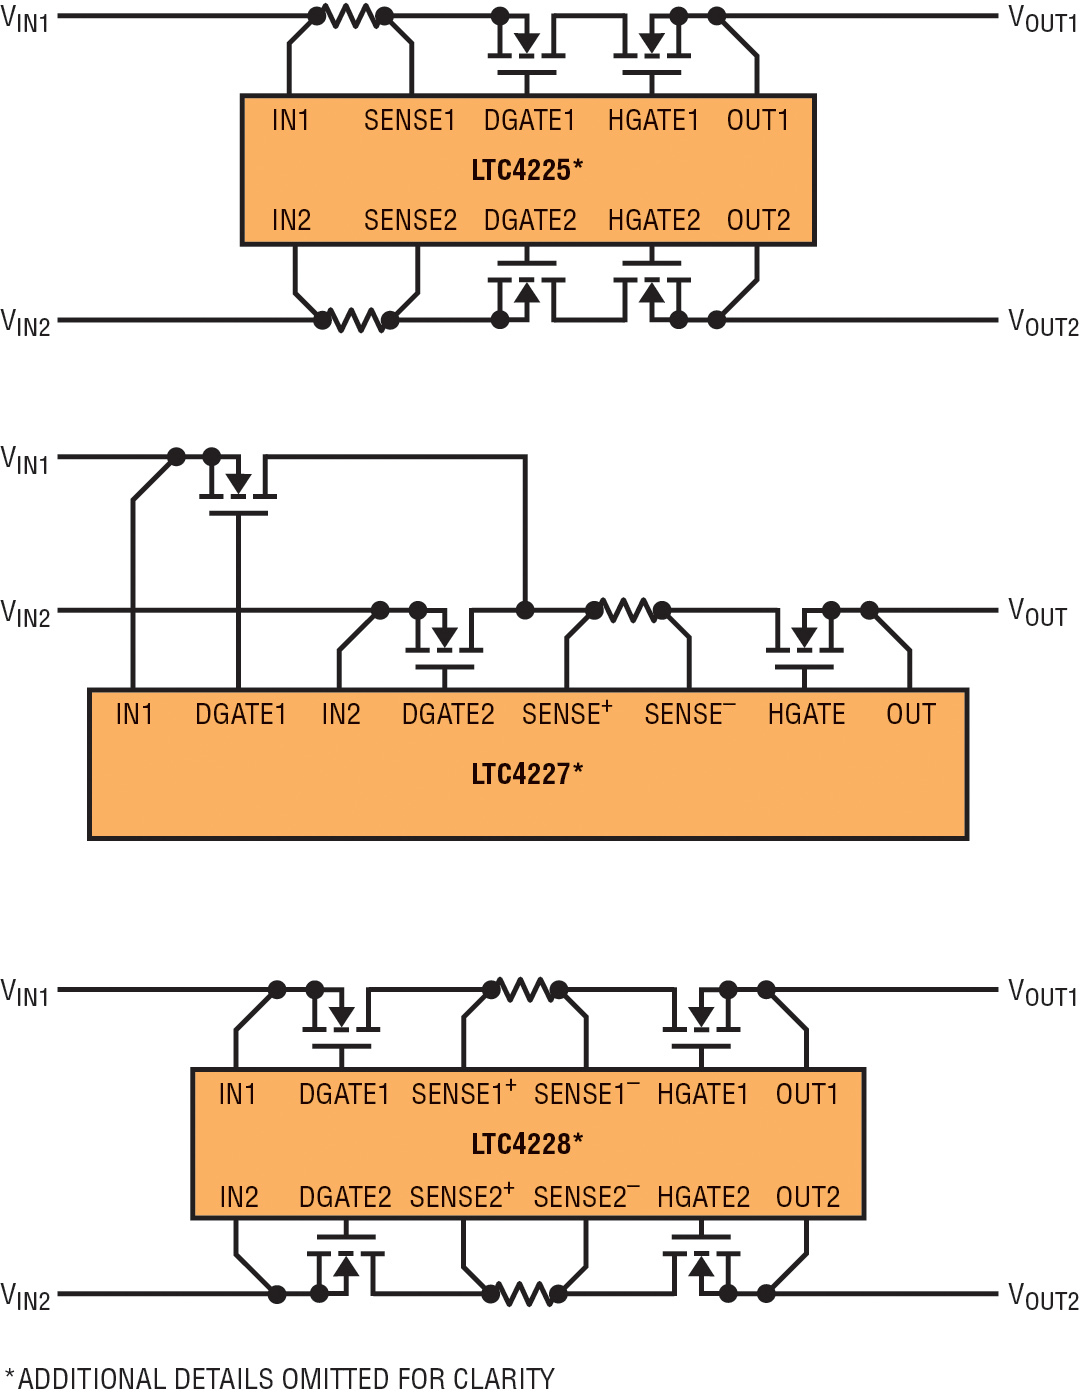 Figure 1 - An overview of different configurations with sense resistor and external N-channel MOSFETs for the LTC4225, LTC4227 and LTC4228